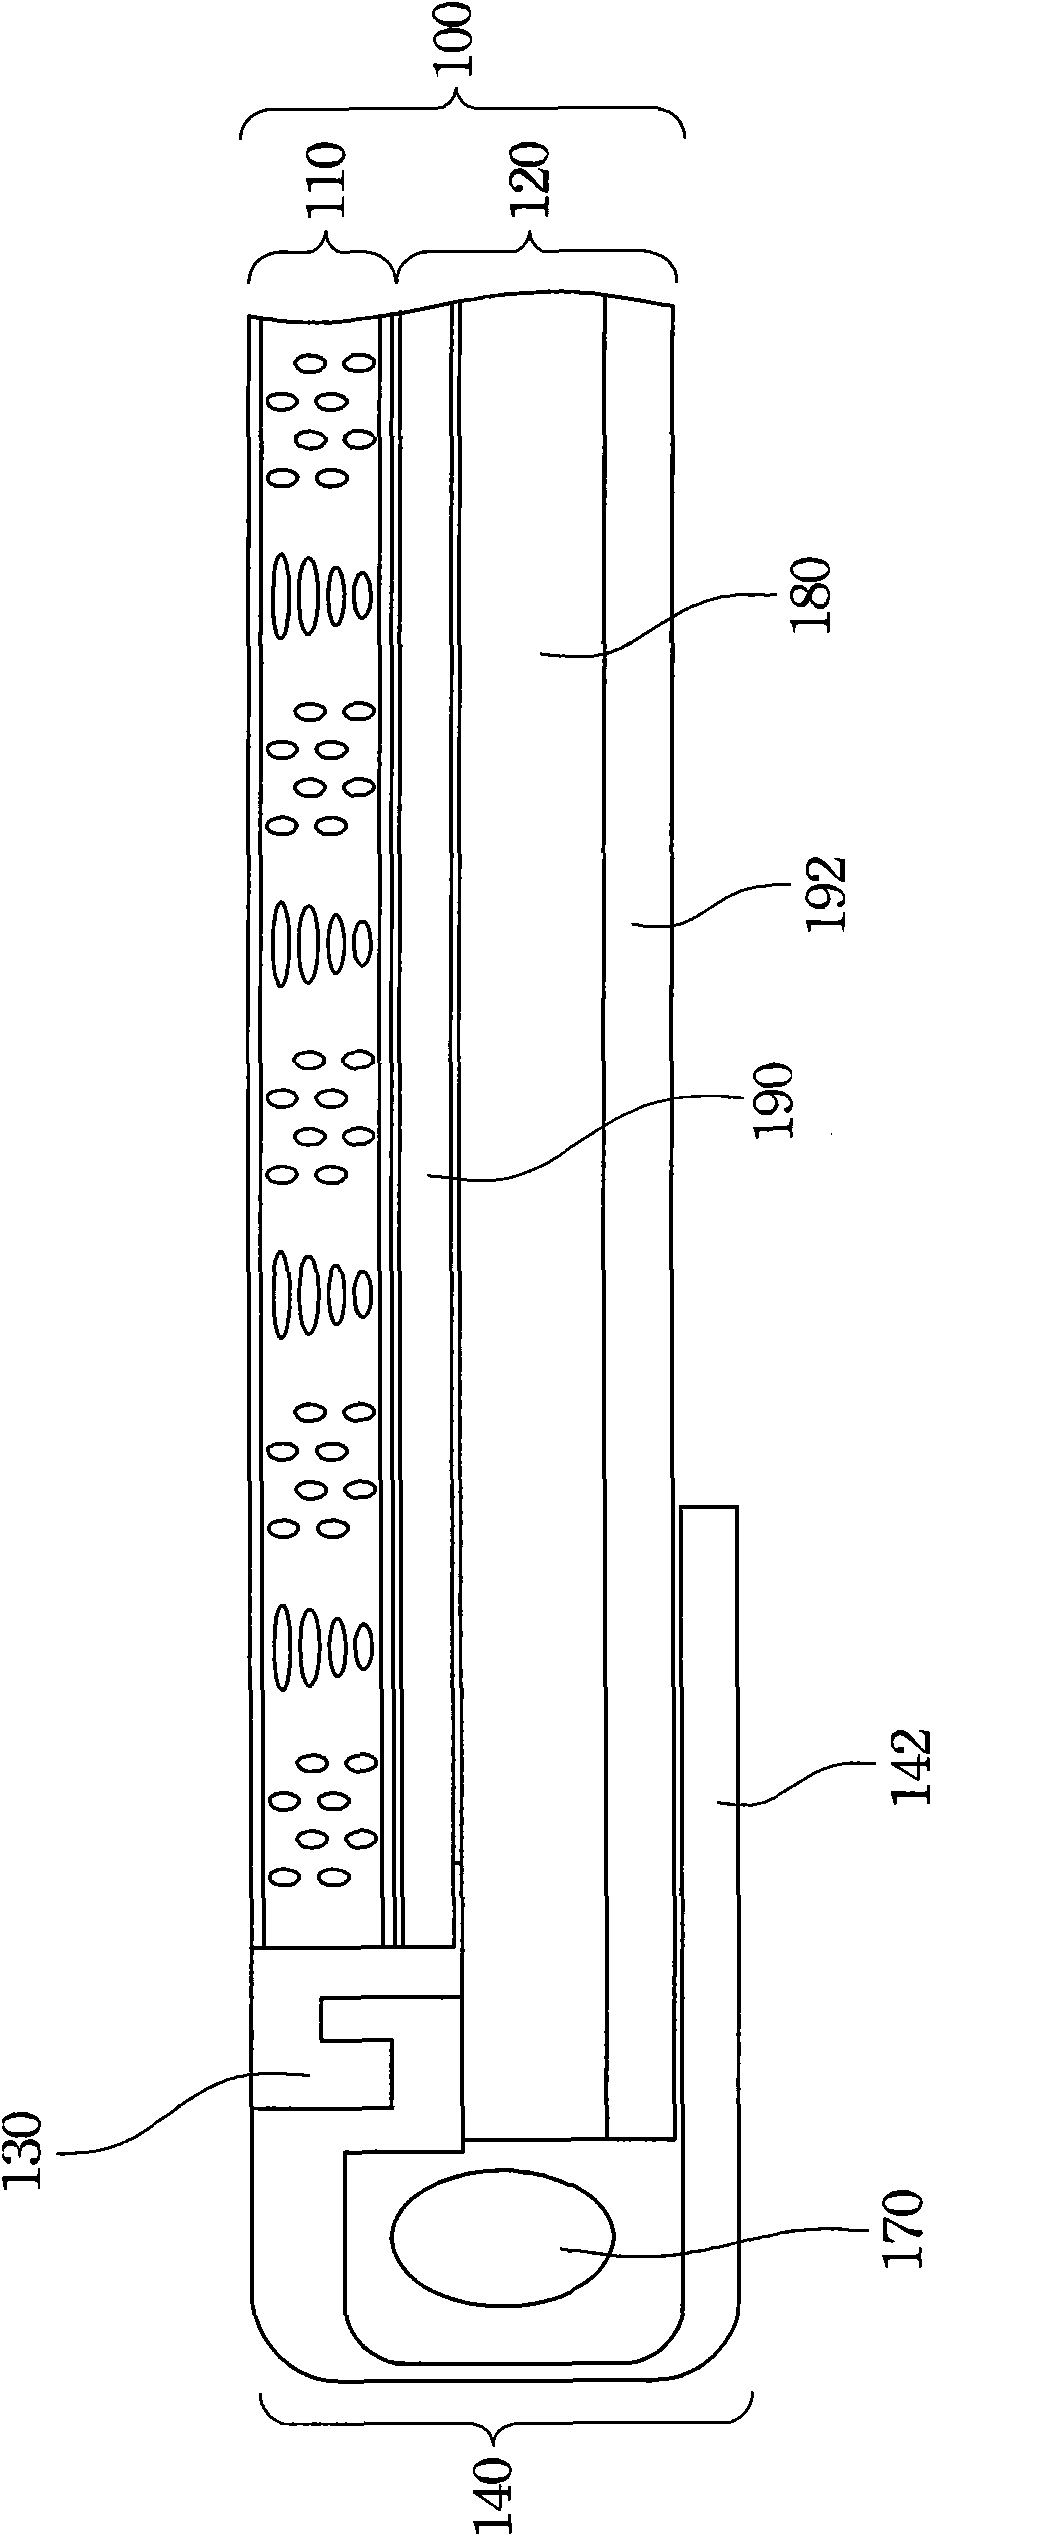 Backlight module and flat-panel display